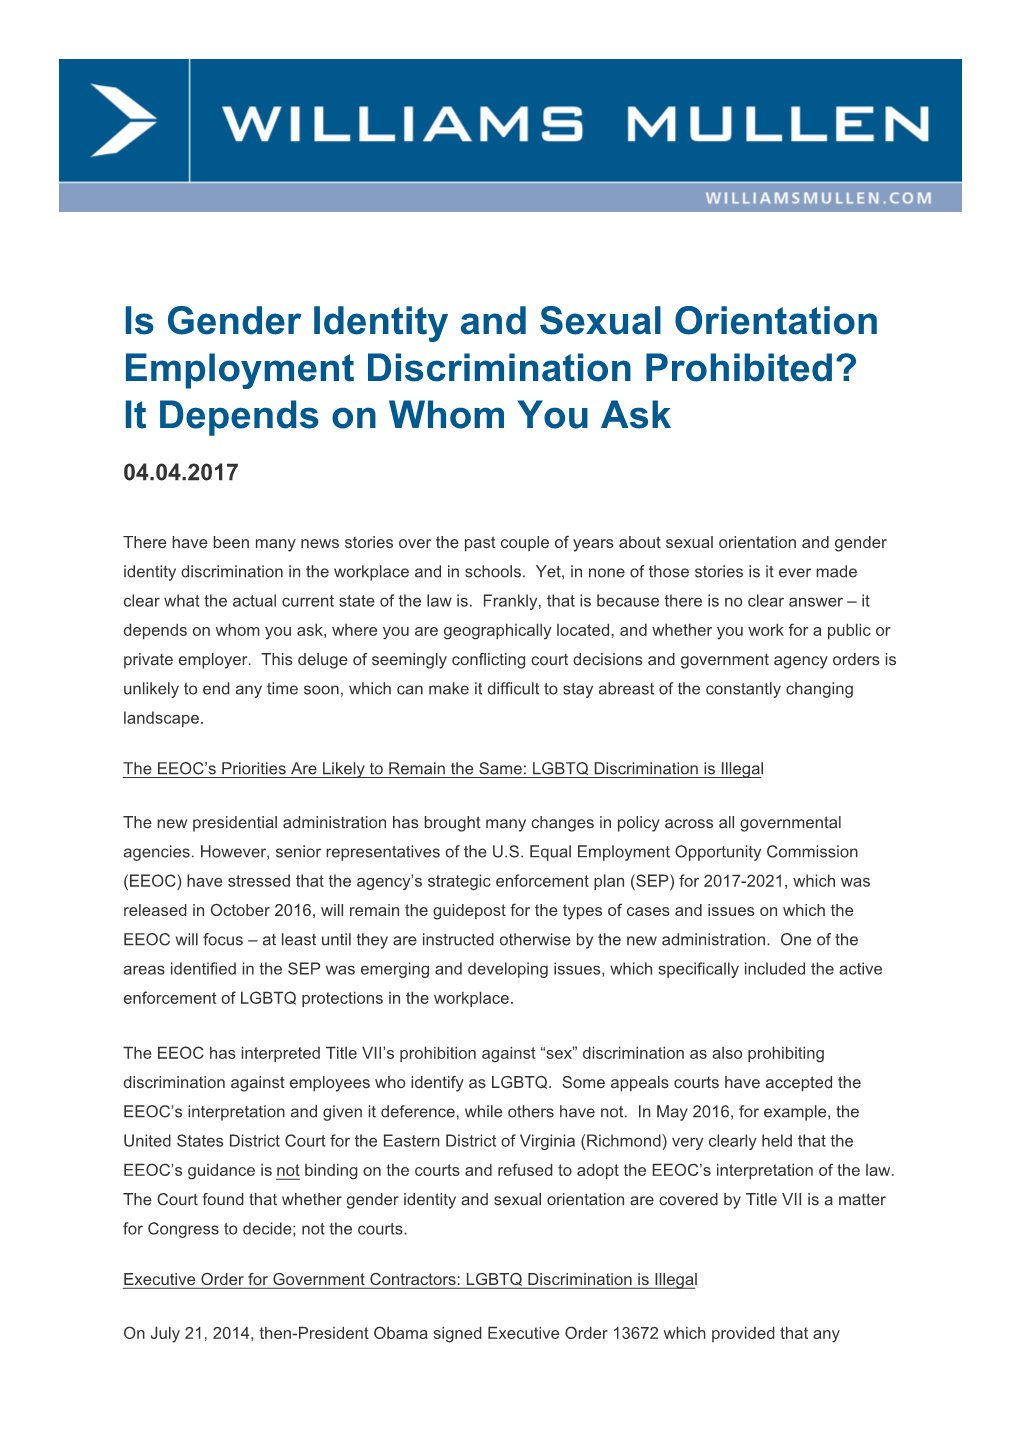 Is Gender Identity and Sexual Orientation Employment Discrimination Prohibited? It Depends on Whom You Ask